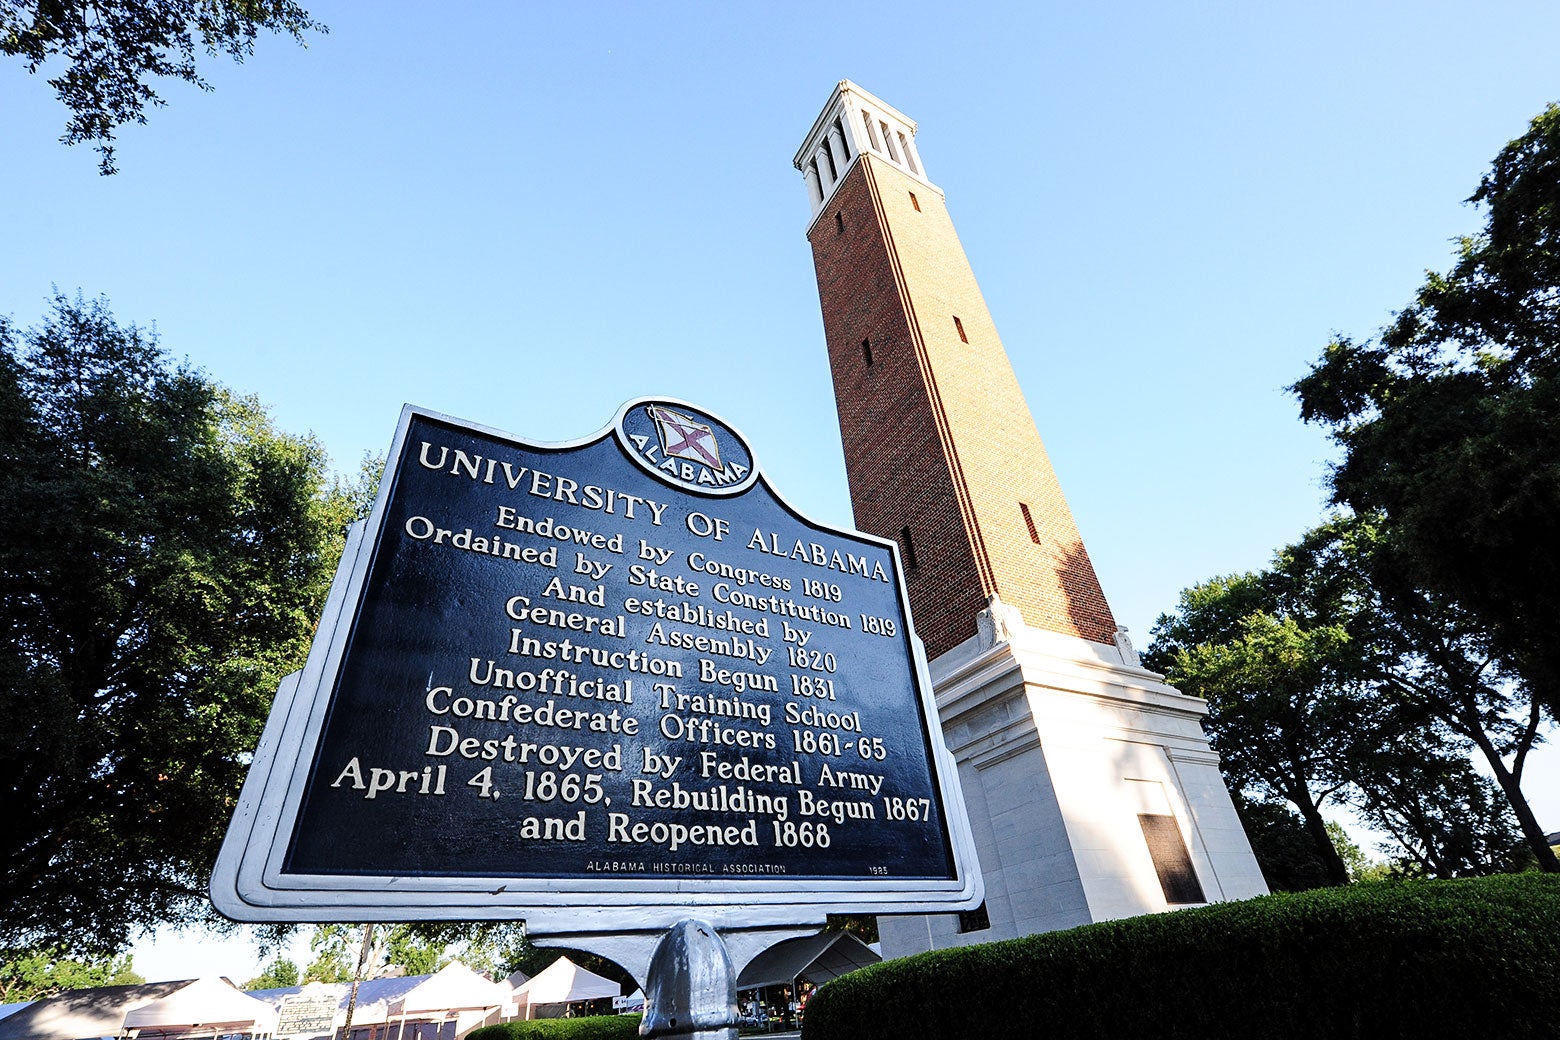 A sign introducing the University of Alabama is seen in front of a tall bell tower.